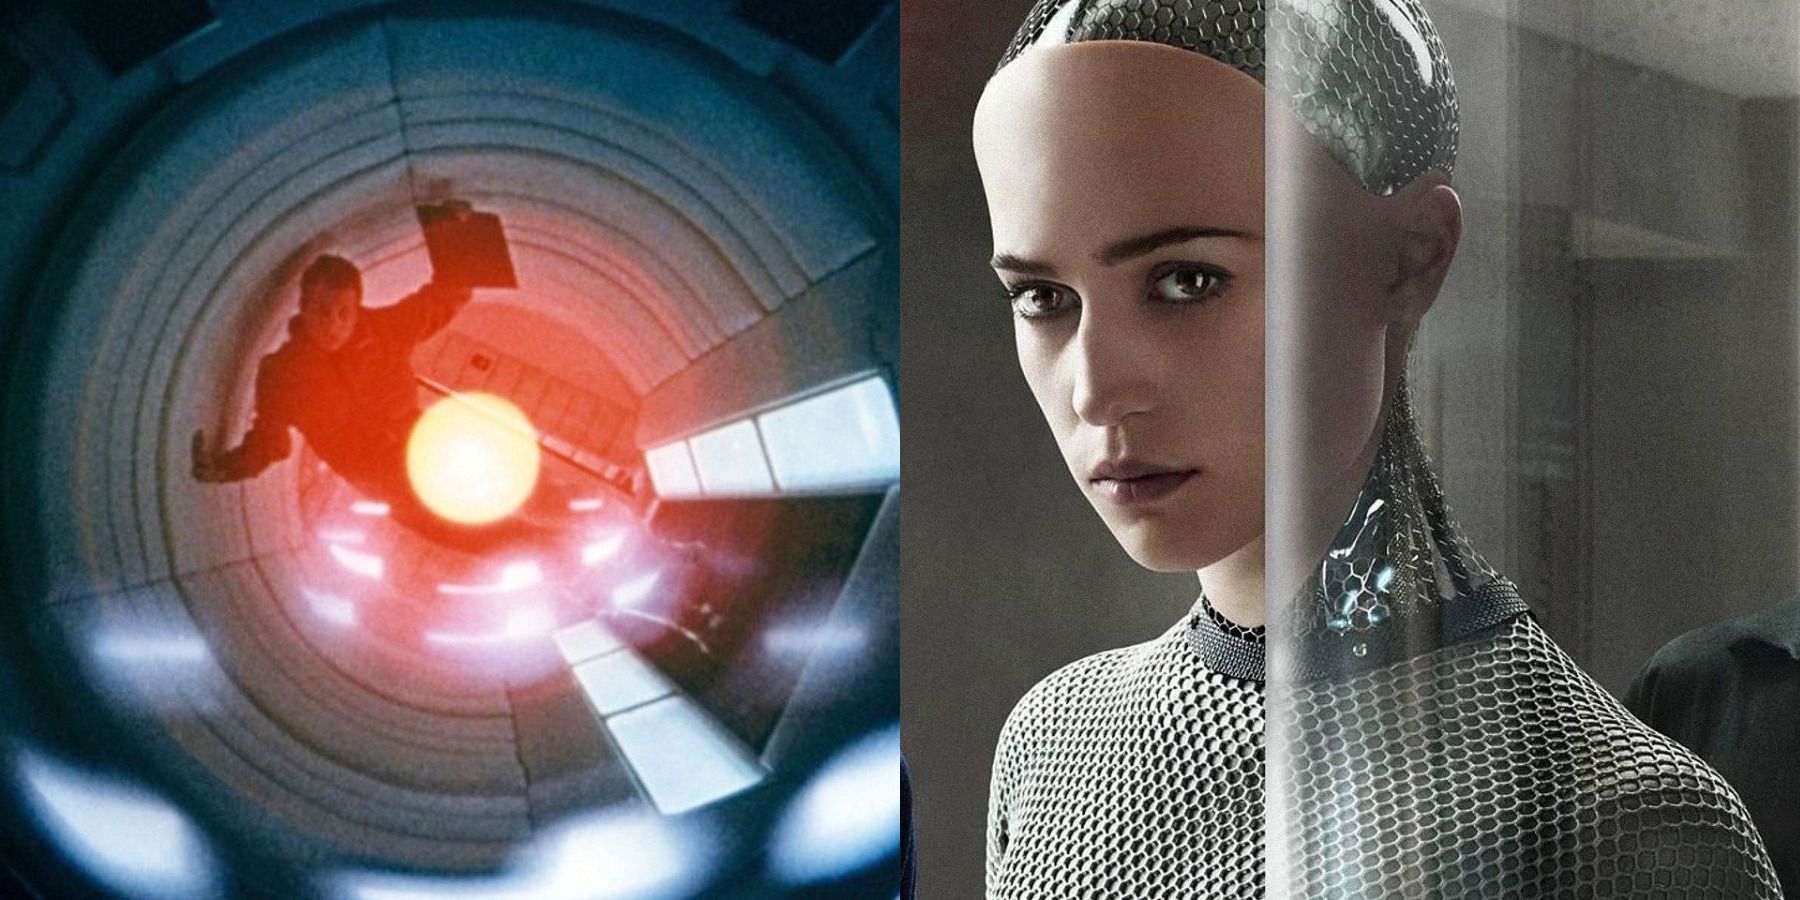 Movies about AI taking over feature